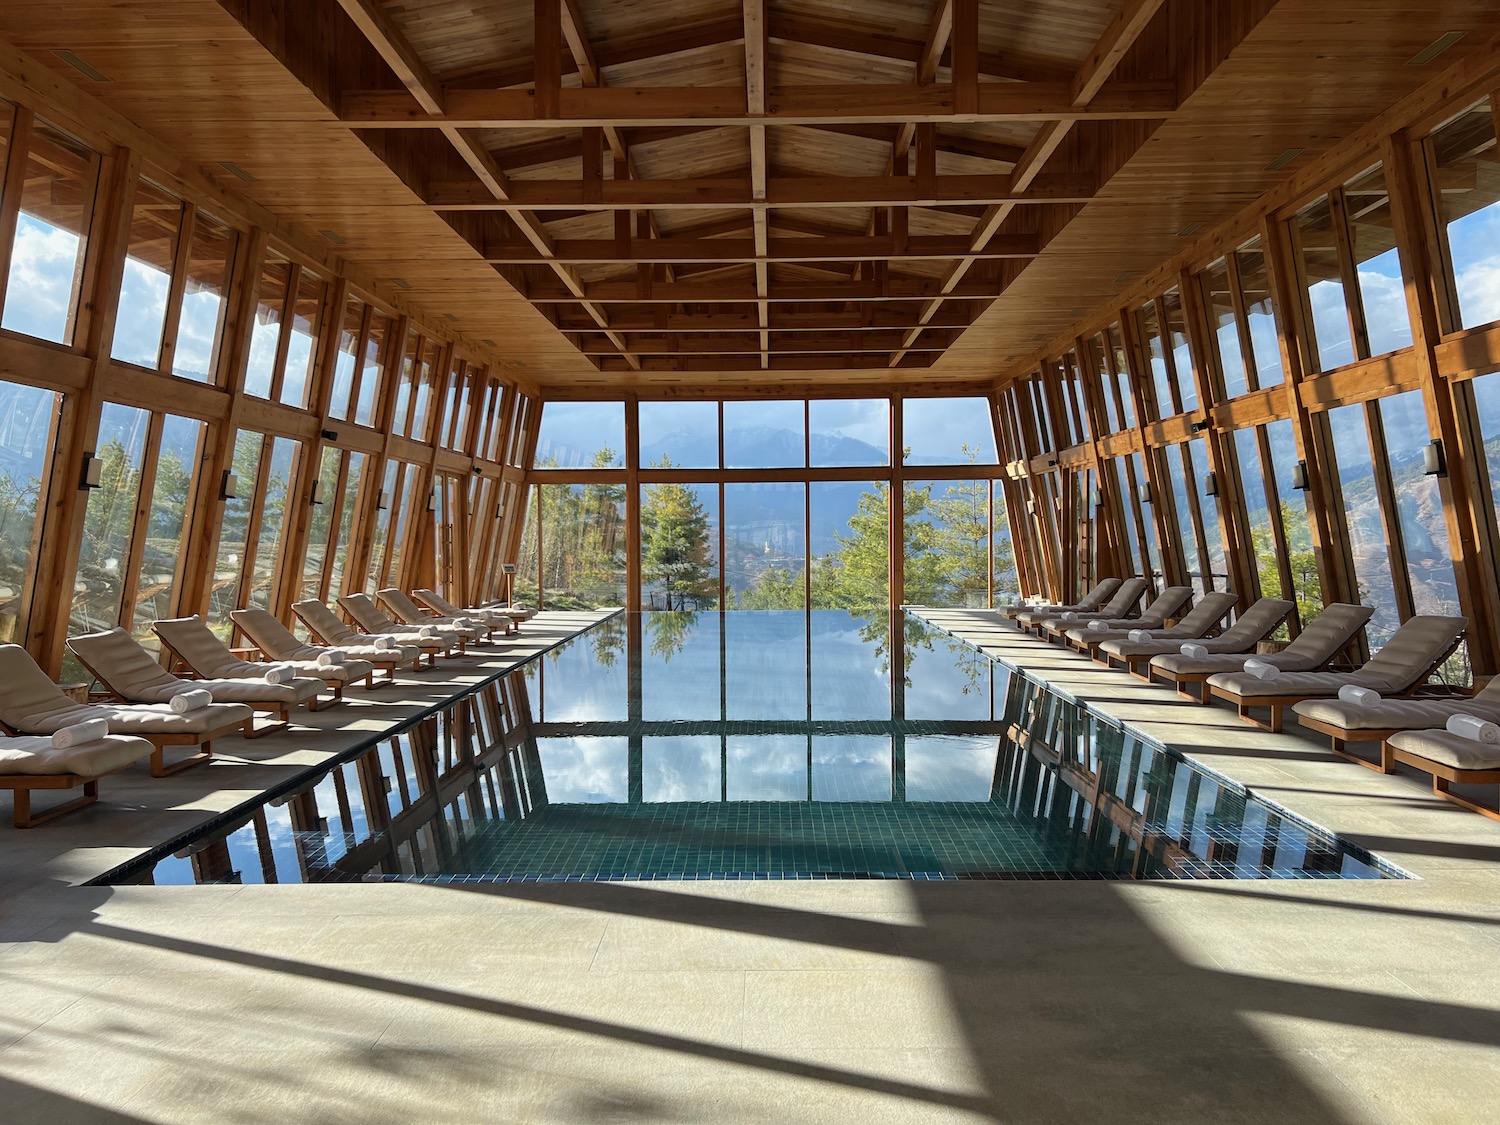 a pool inside a building with chairs and a view of mountains